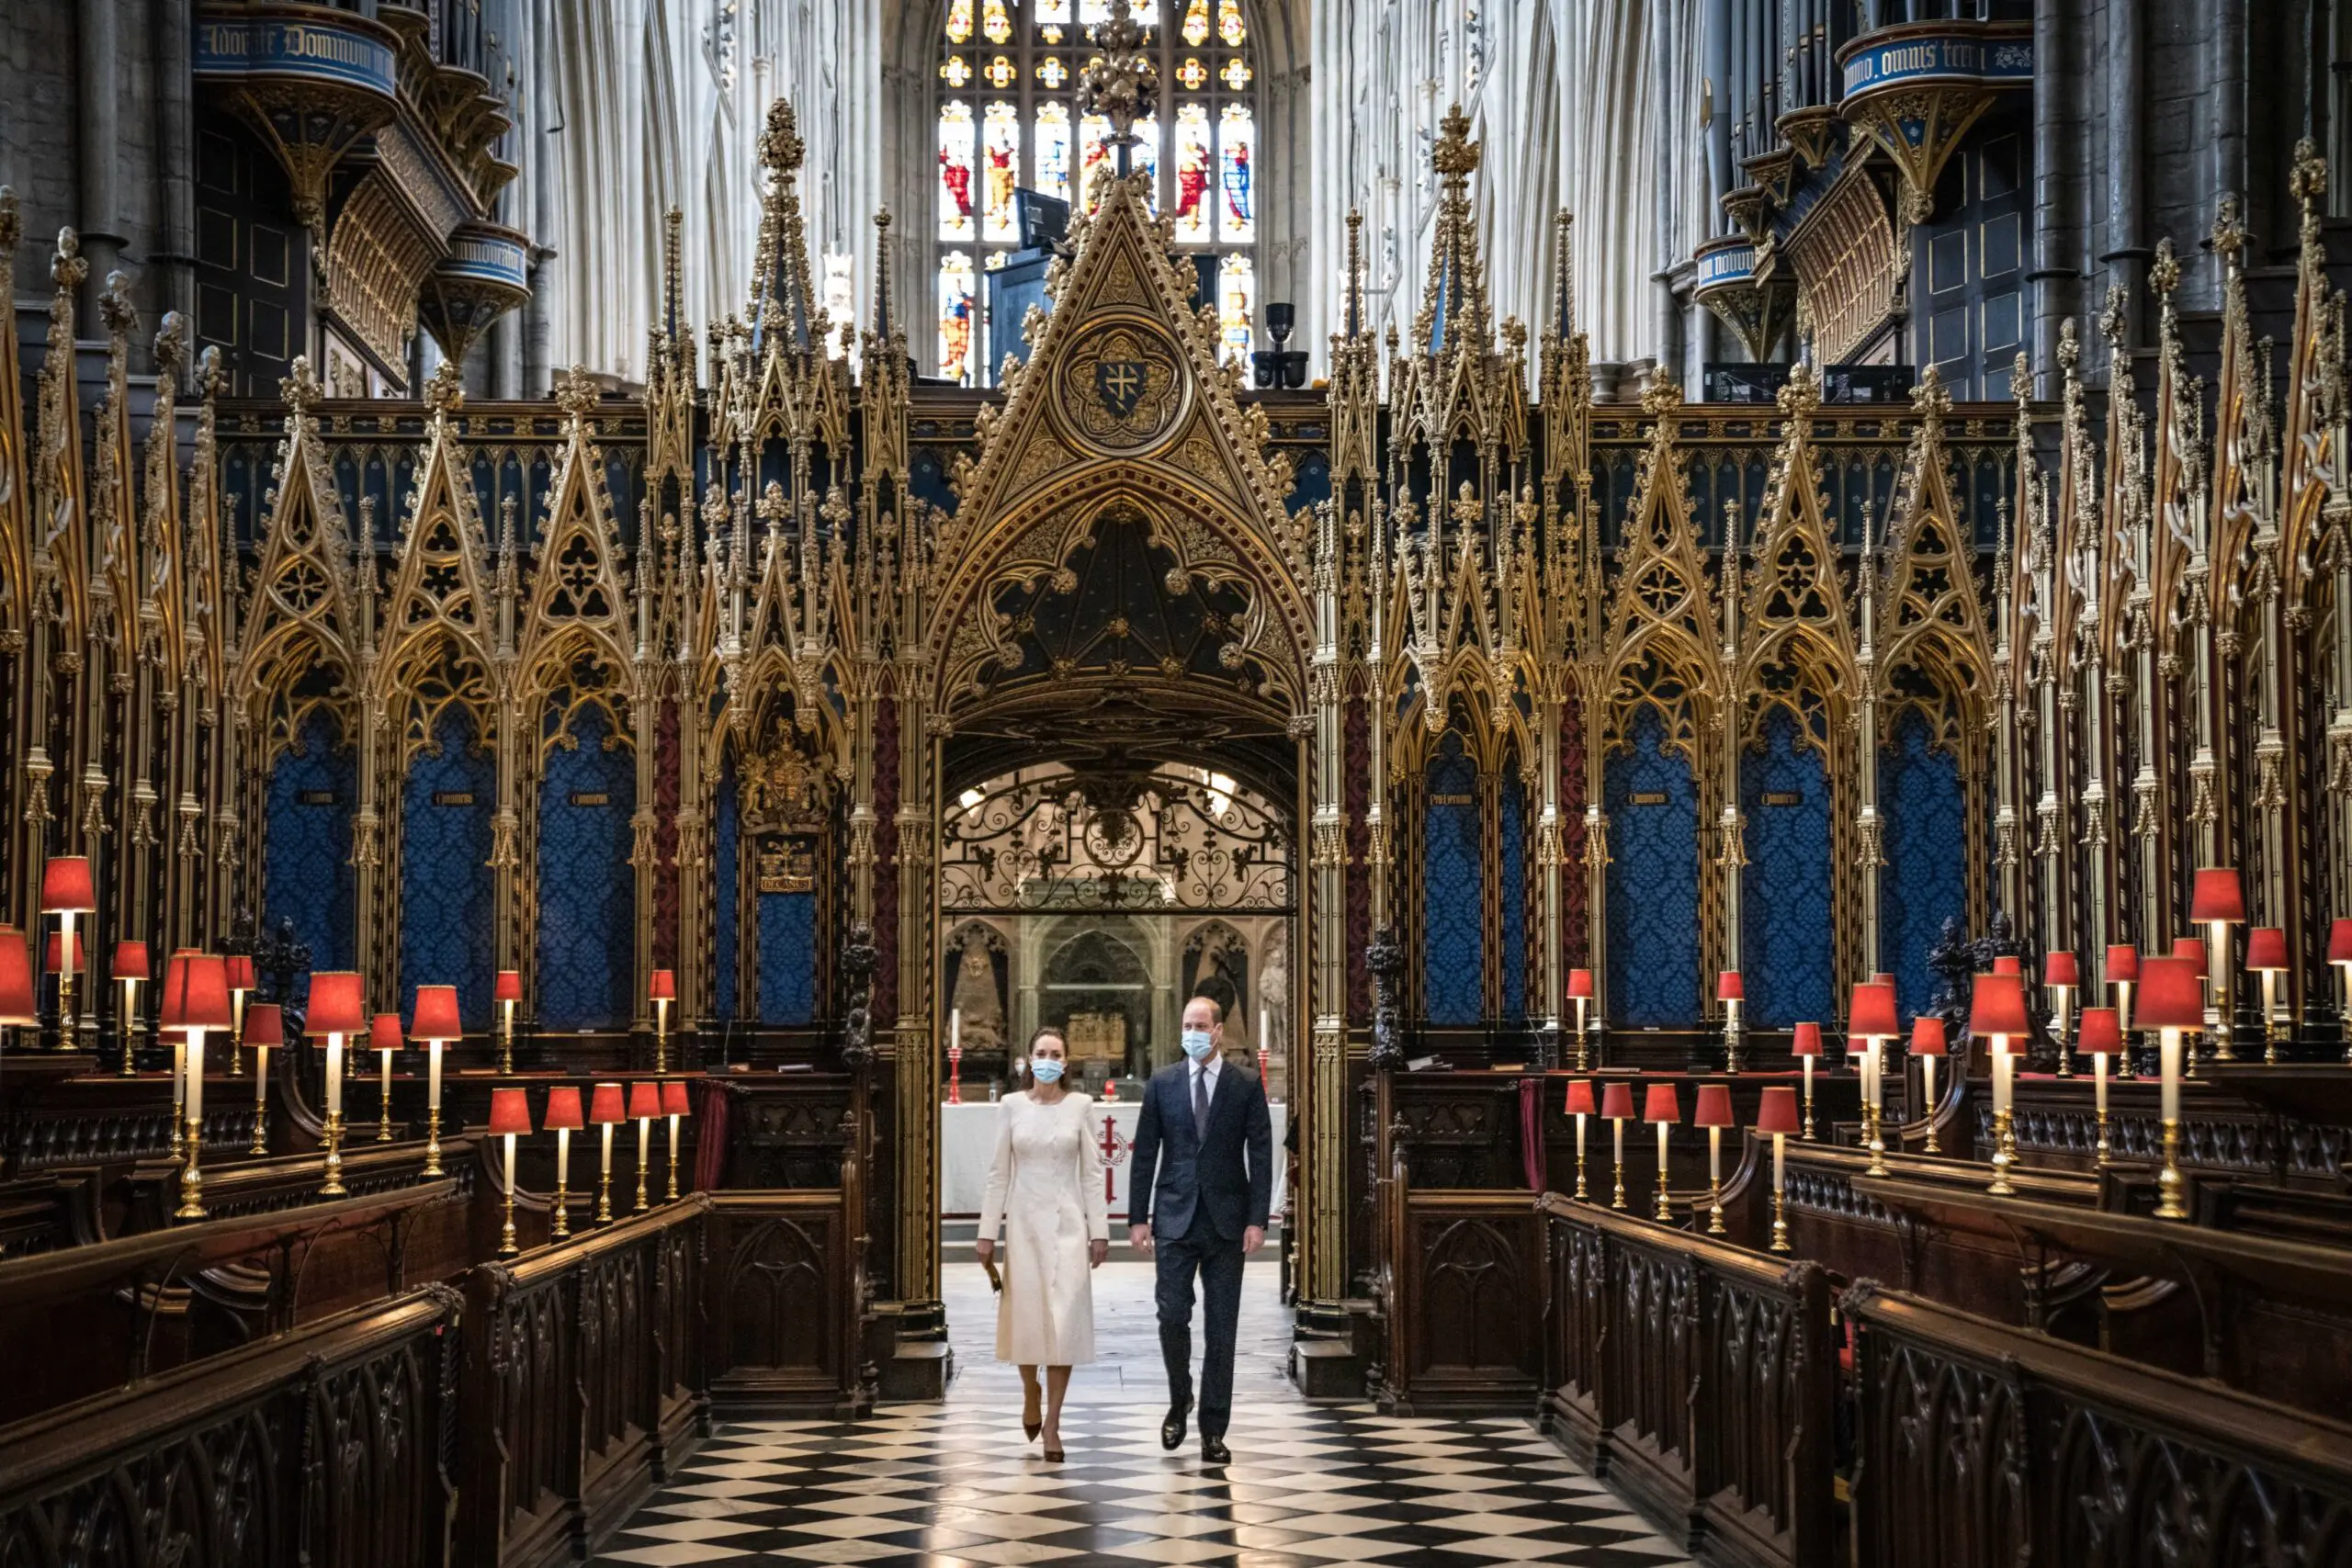 The Duke and Duchess of Cambridge arriving at the Westminster Abbey